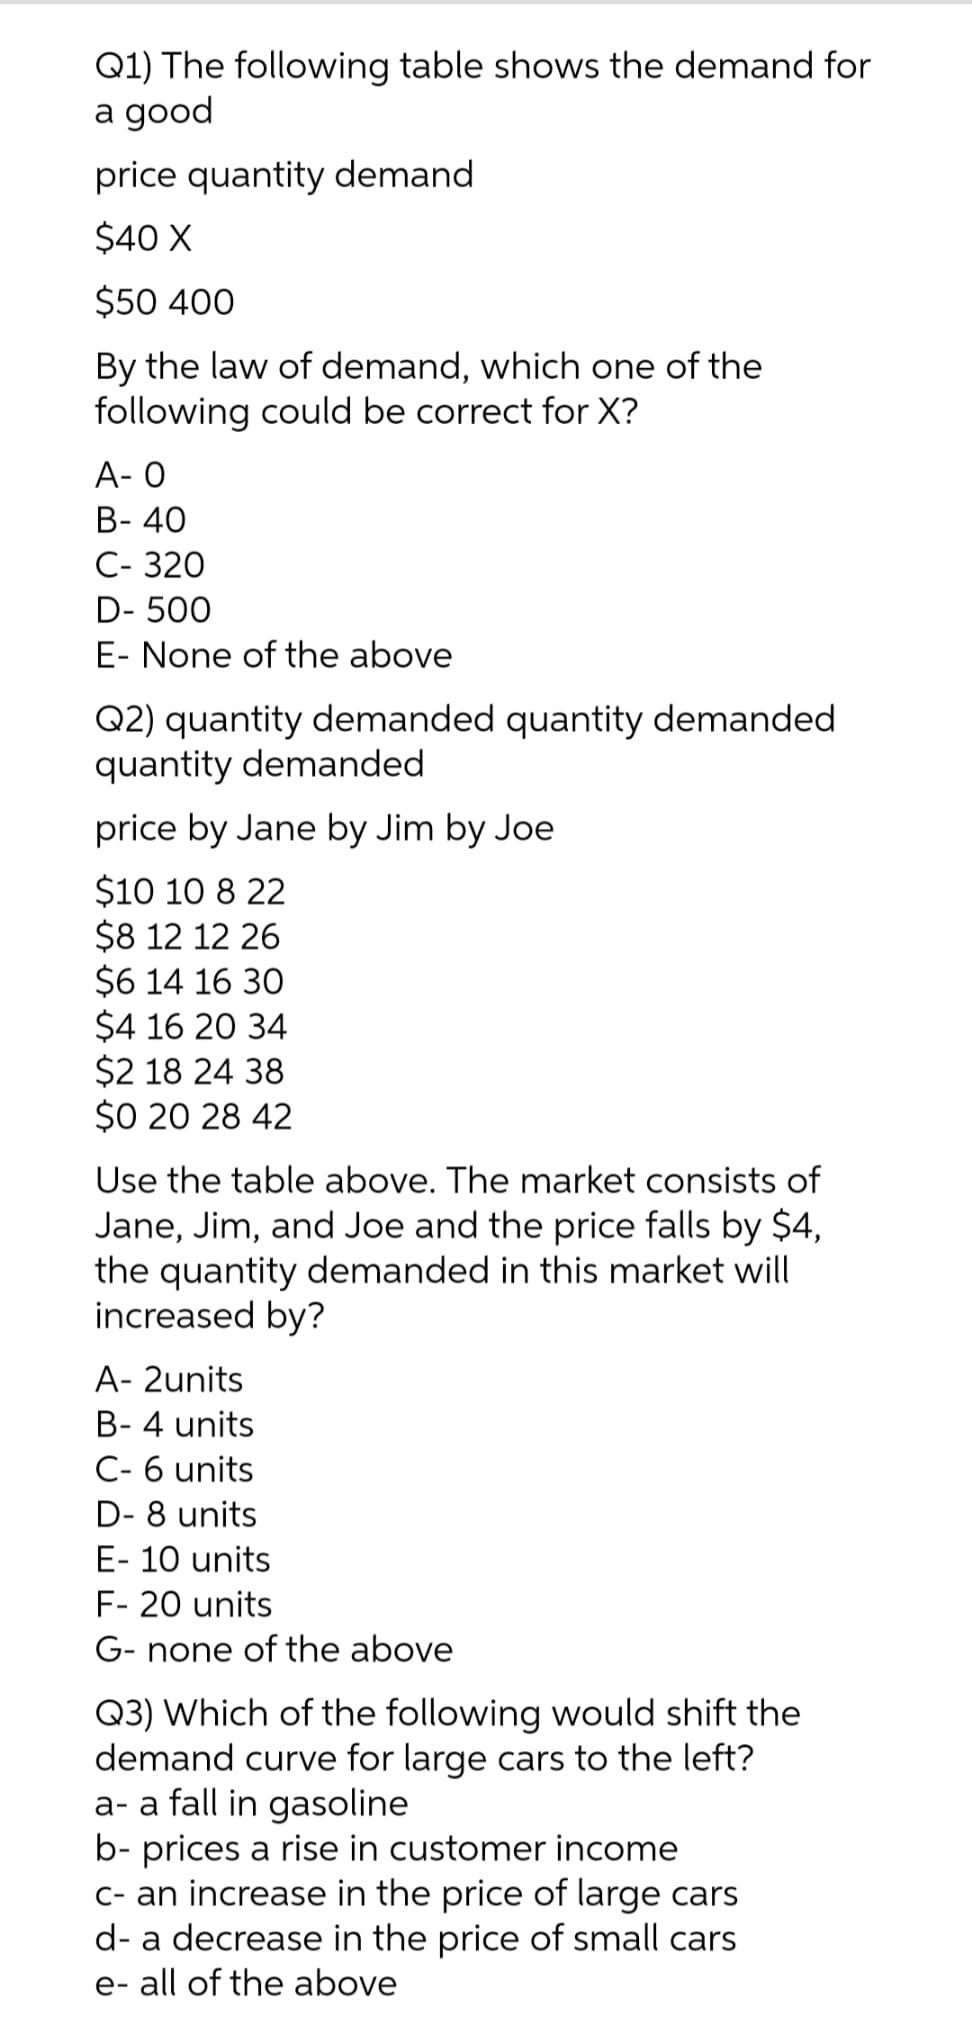 Q1) The following table shows the demand for
a good
price quantity demand
$40 X
$50 400
By the law of demand, which one of the
following could be correct for X?
A- O
B- 40
C-320
D-500
E- None of the above
Q2) quantity demanded quantity demanded
quantity demanded
price by Jane by Jim by Joe
$10 10 8 22
$8 12 12 26
$6 14 16 30
$4 16 20 34
$2 18 24 38
$0 20 28 42
Use the table above. The market consists of
Jane, Jim, and Joe and the price falls by $4,
the quantity demanded in this market will
increased by?
A- 2units
B-4 units
C- 6 units
D-8 units
E- 10 units
F- 20 units
G- none of the above
Q3) Which of the following would shift the
demand curve for large cars to the left?
a- a fall in gasoline
b- prices a rise in customer income
c- an increase in the price of large cars
d- a decrease in the price of small cars
e- all of the above